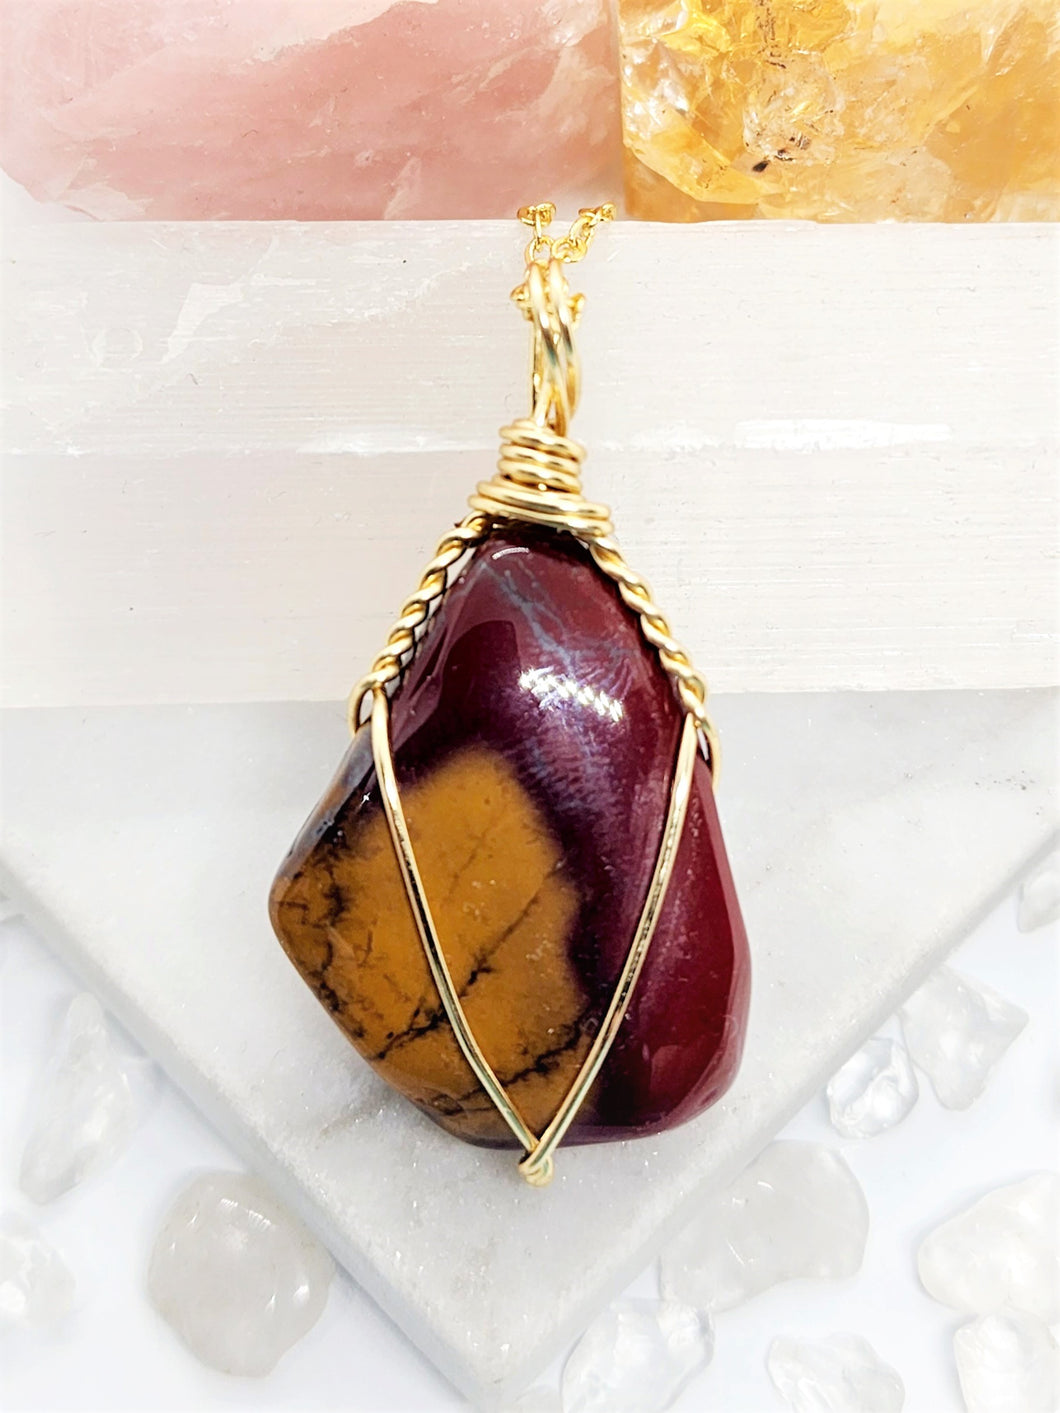 Mookaite is thought to boost intuition and deepen one's spiritual connection with nature, fostering inner harmony and growth